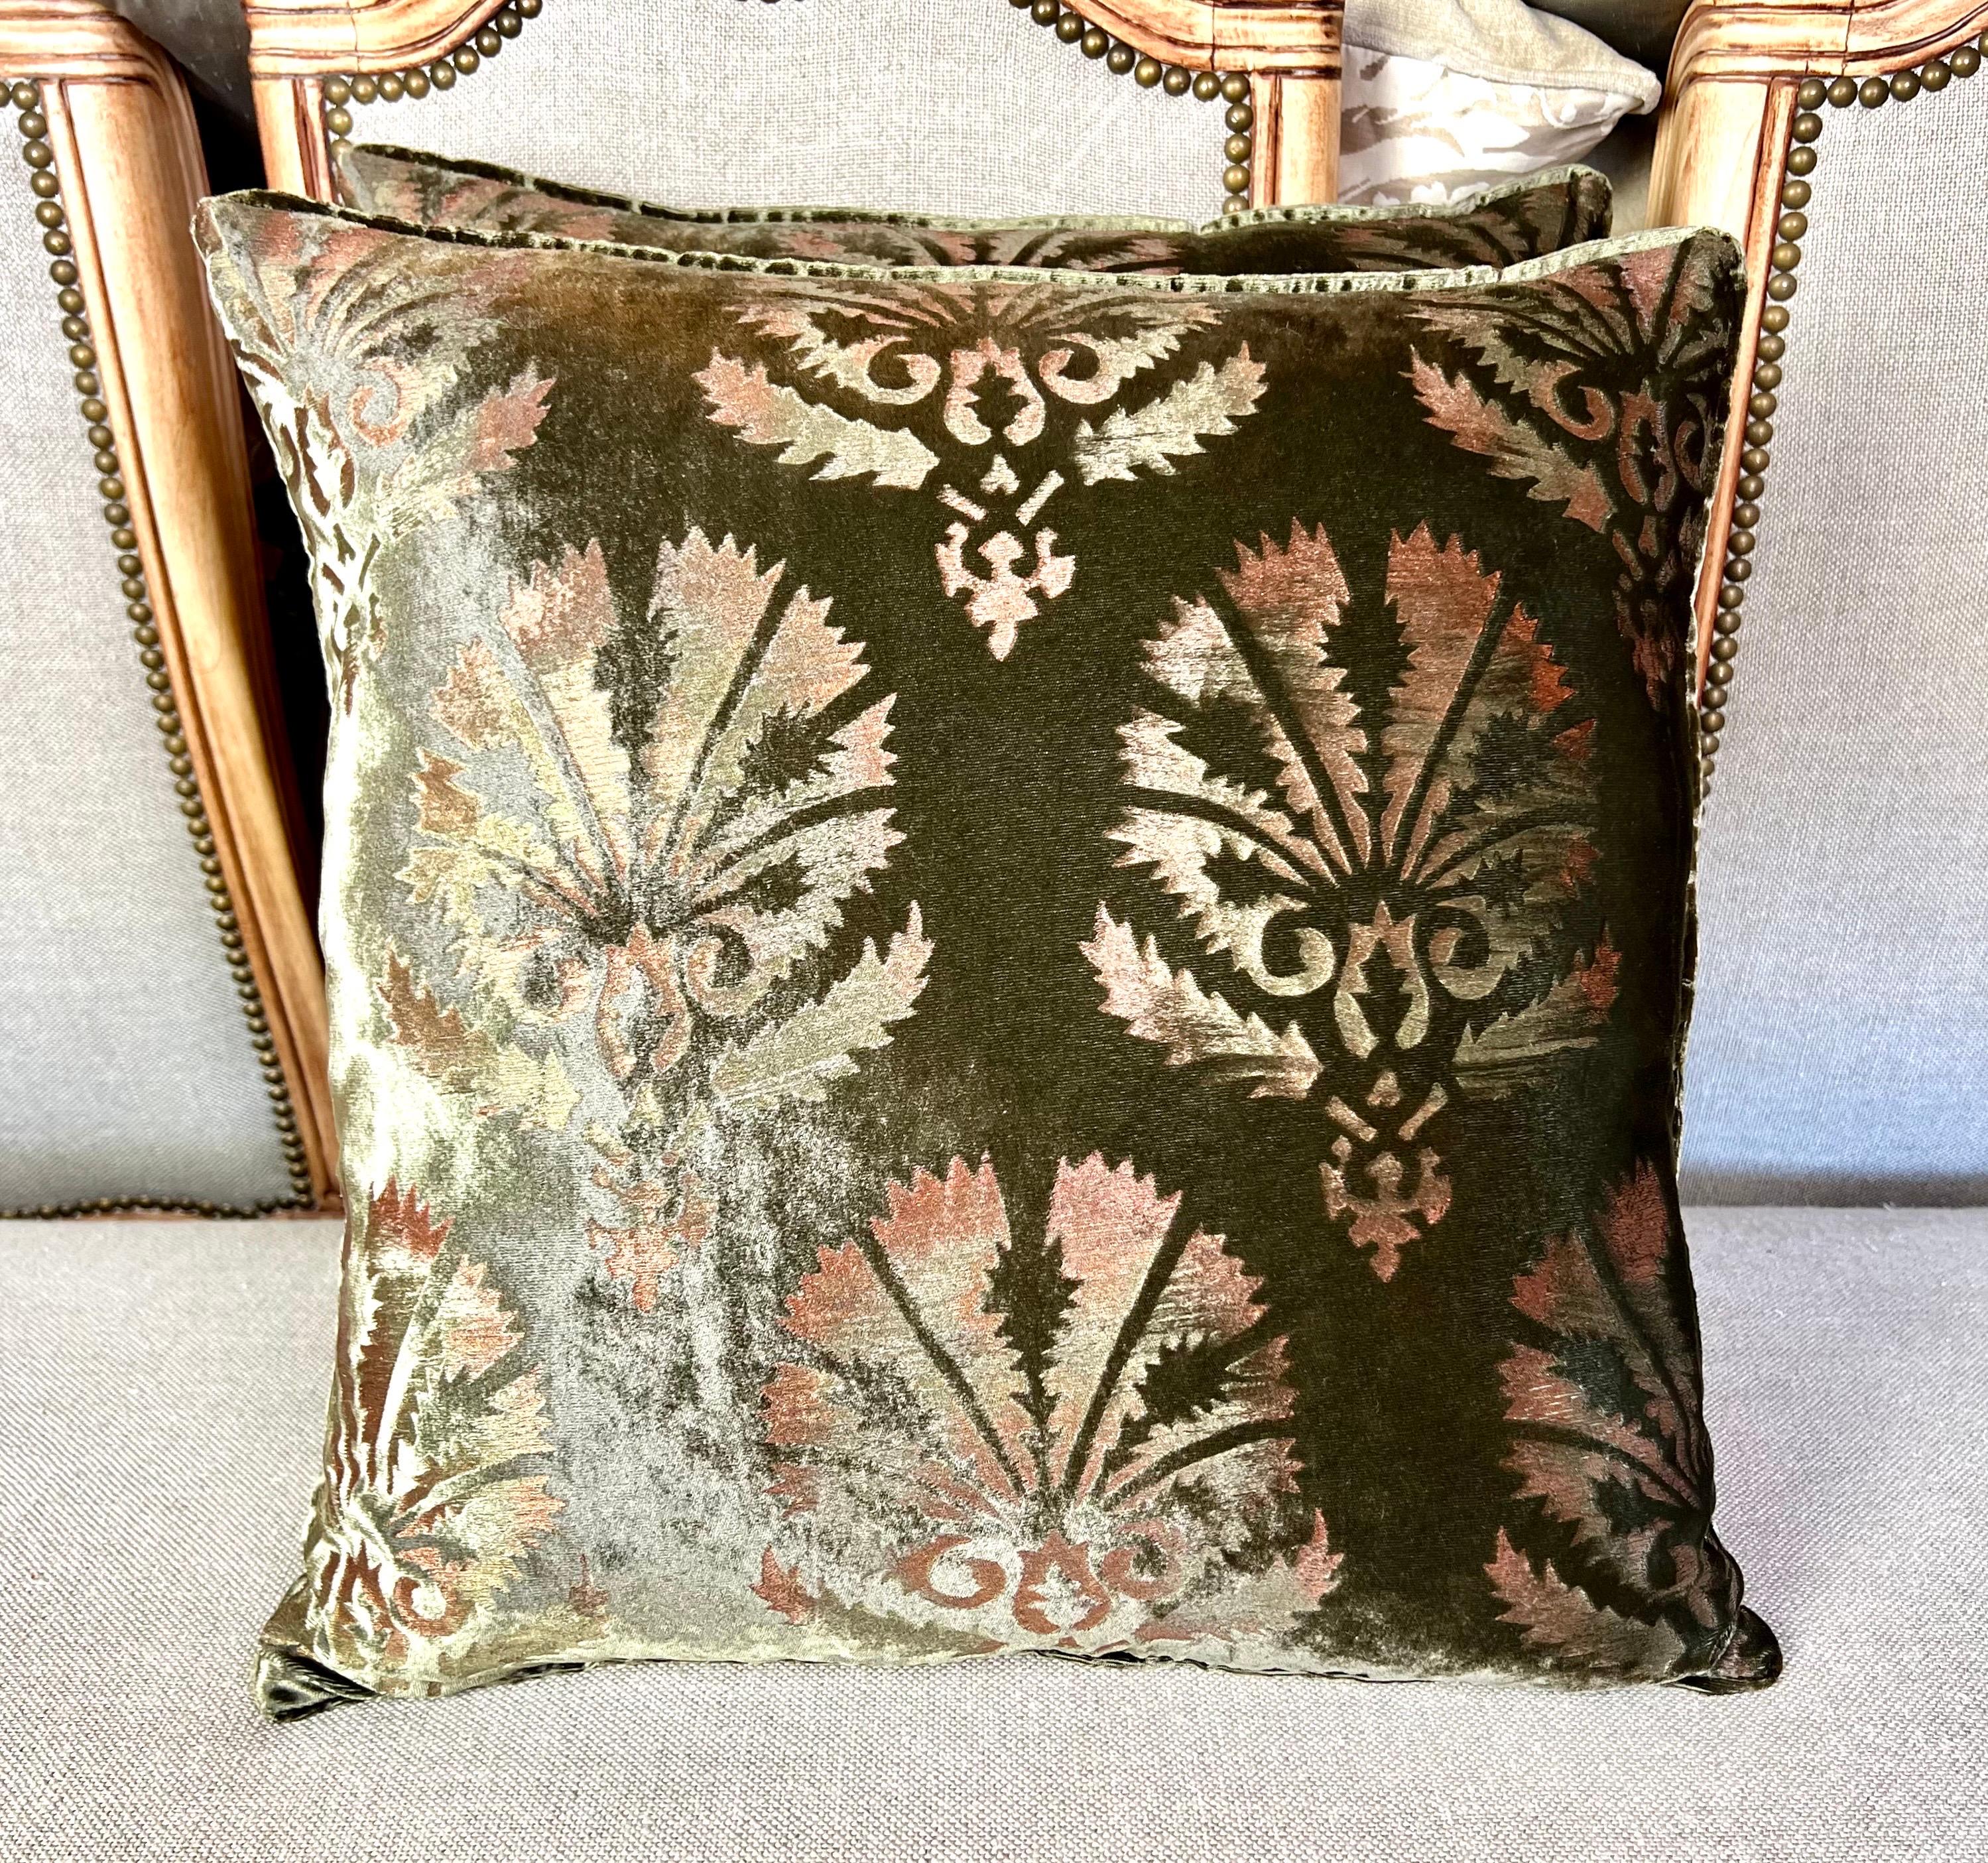 Pair of Custom Nomi Textiles olive green stenciled velvet pillows.  These pillows feature a damask design with delicate stenciling that has touches of pink and yellow on olive green velvet, backed with a coordinating olive green velvet.  The pillows